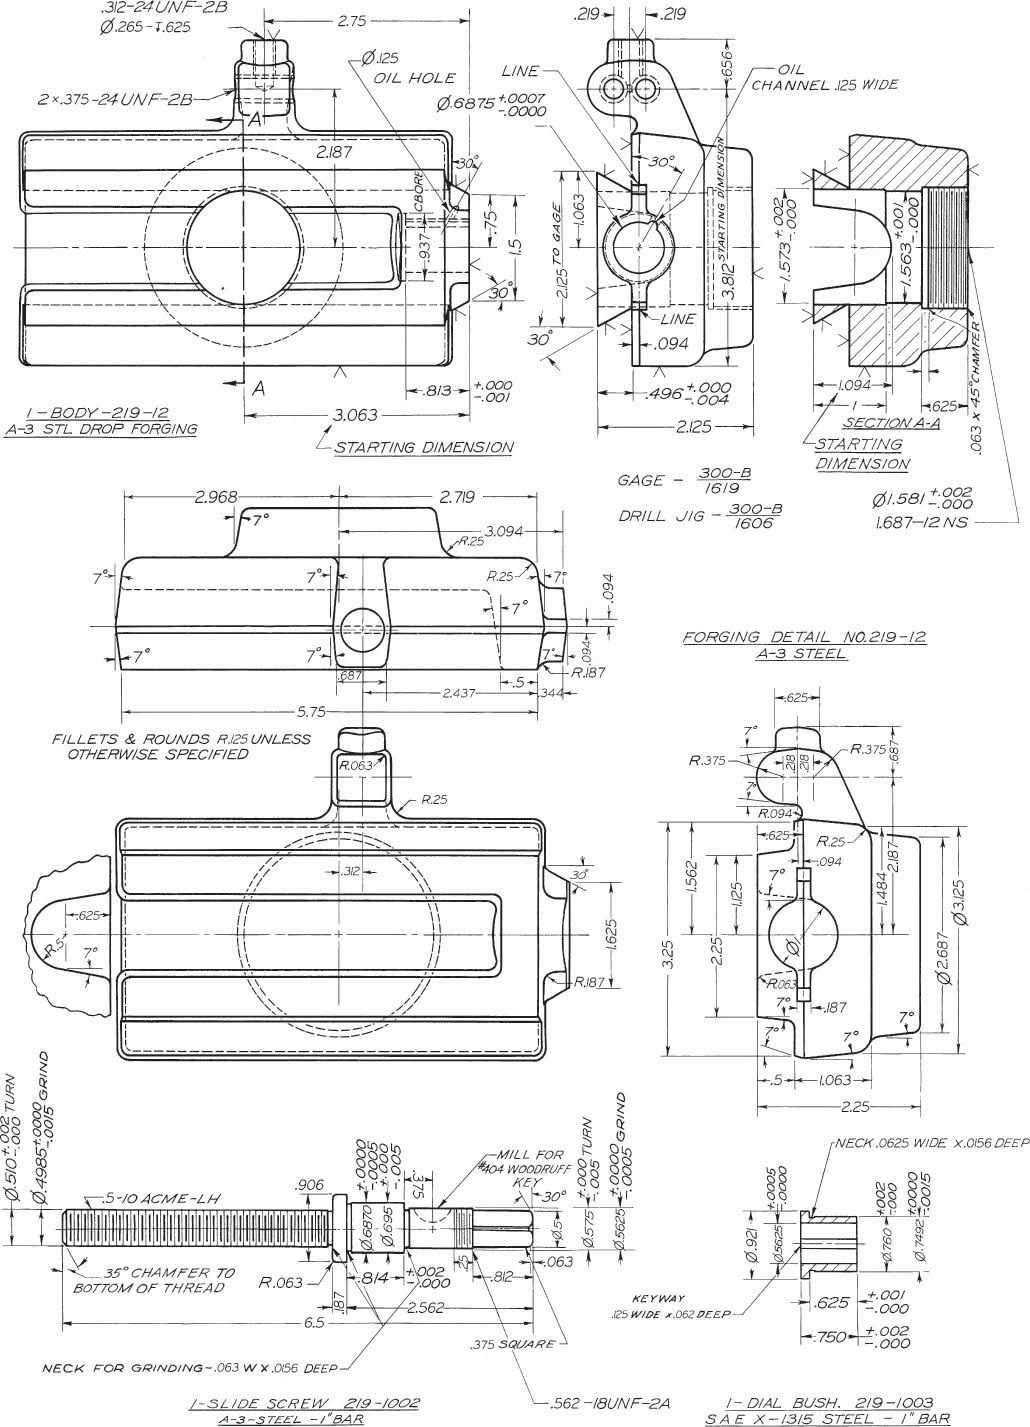 Figure depicts the continued drawing of the slide tool and the assembly details are assigned in the drawing.